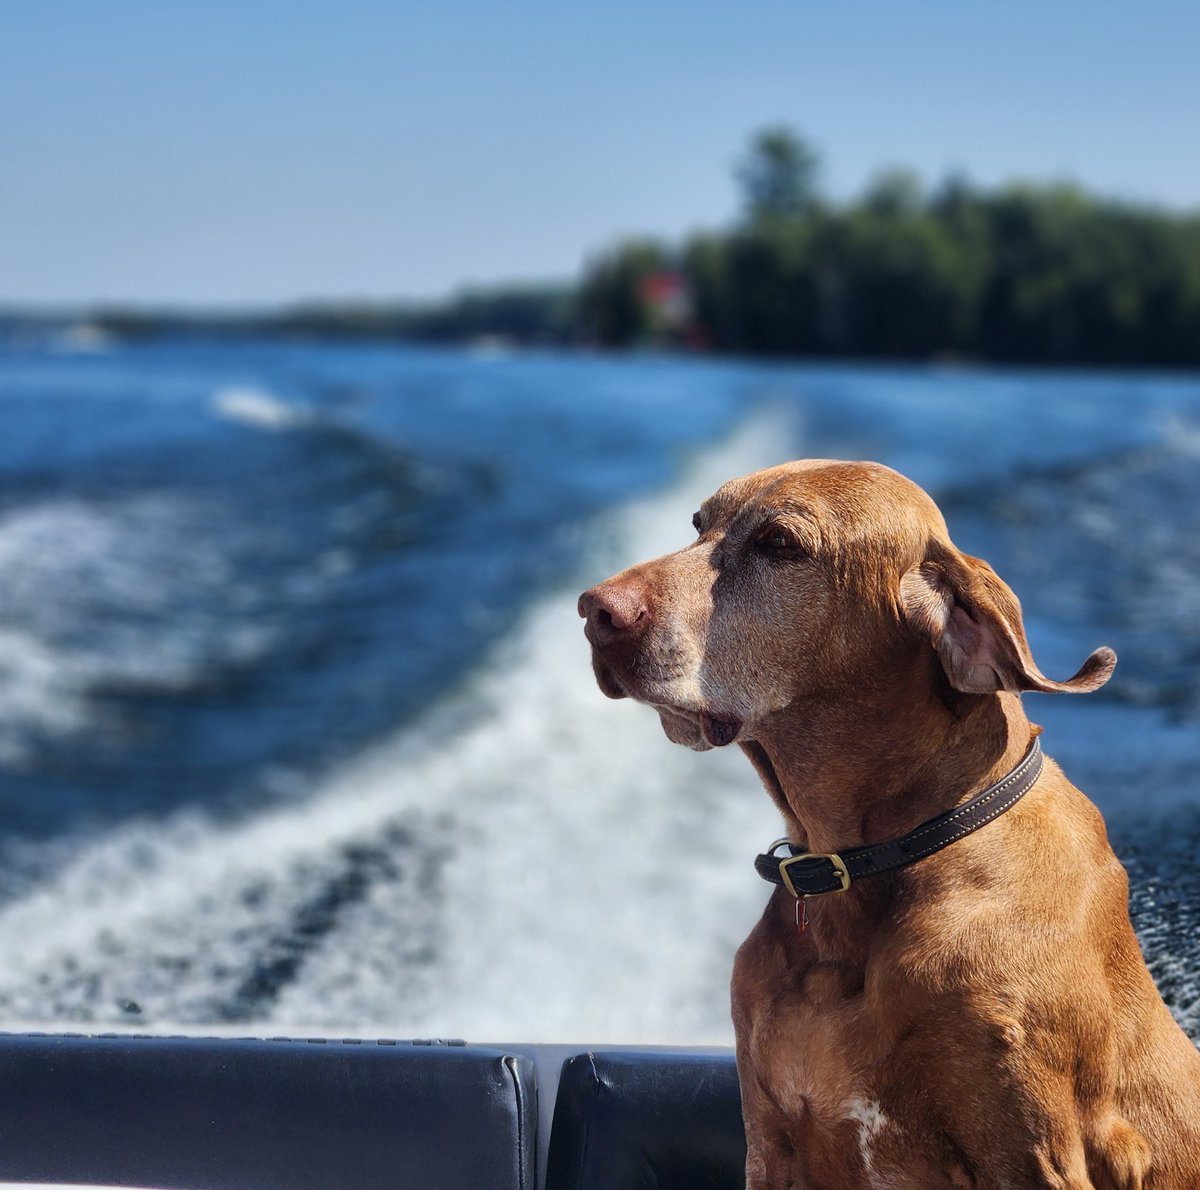 Another day, another boat ride! Beautiful long weekend weather here! And check out brudder Chester's #earart! (@TNflattop this one's for you!😂) #dogs #dogtwitter #dogsoftwitter #xdogs #boatlife #cottagelife